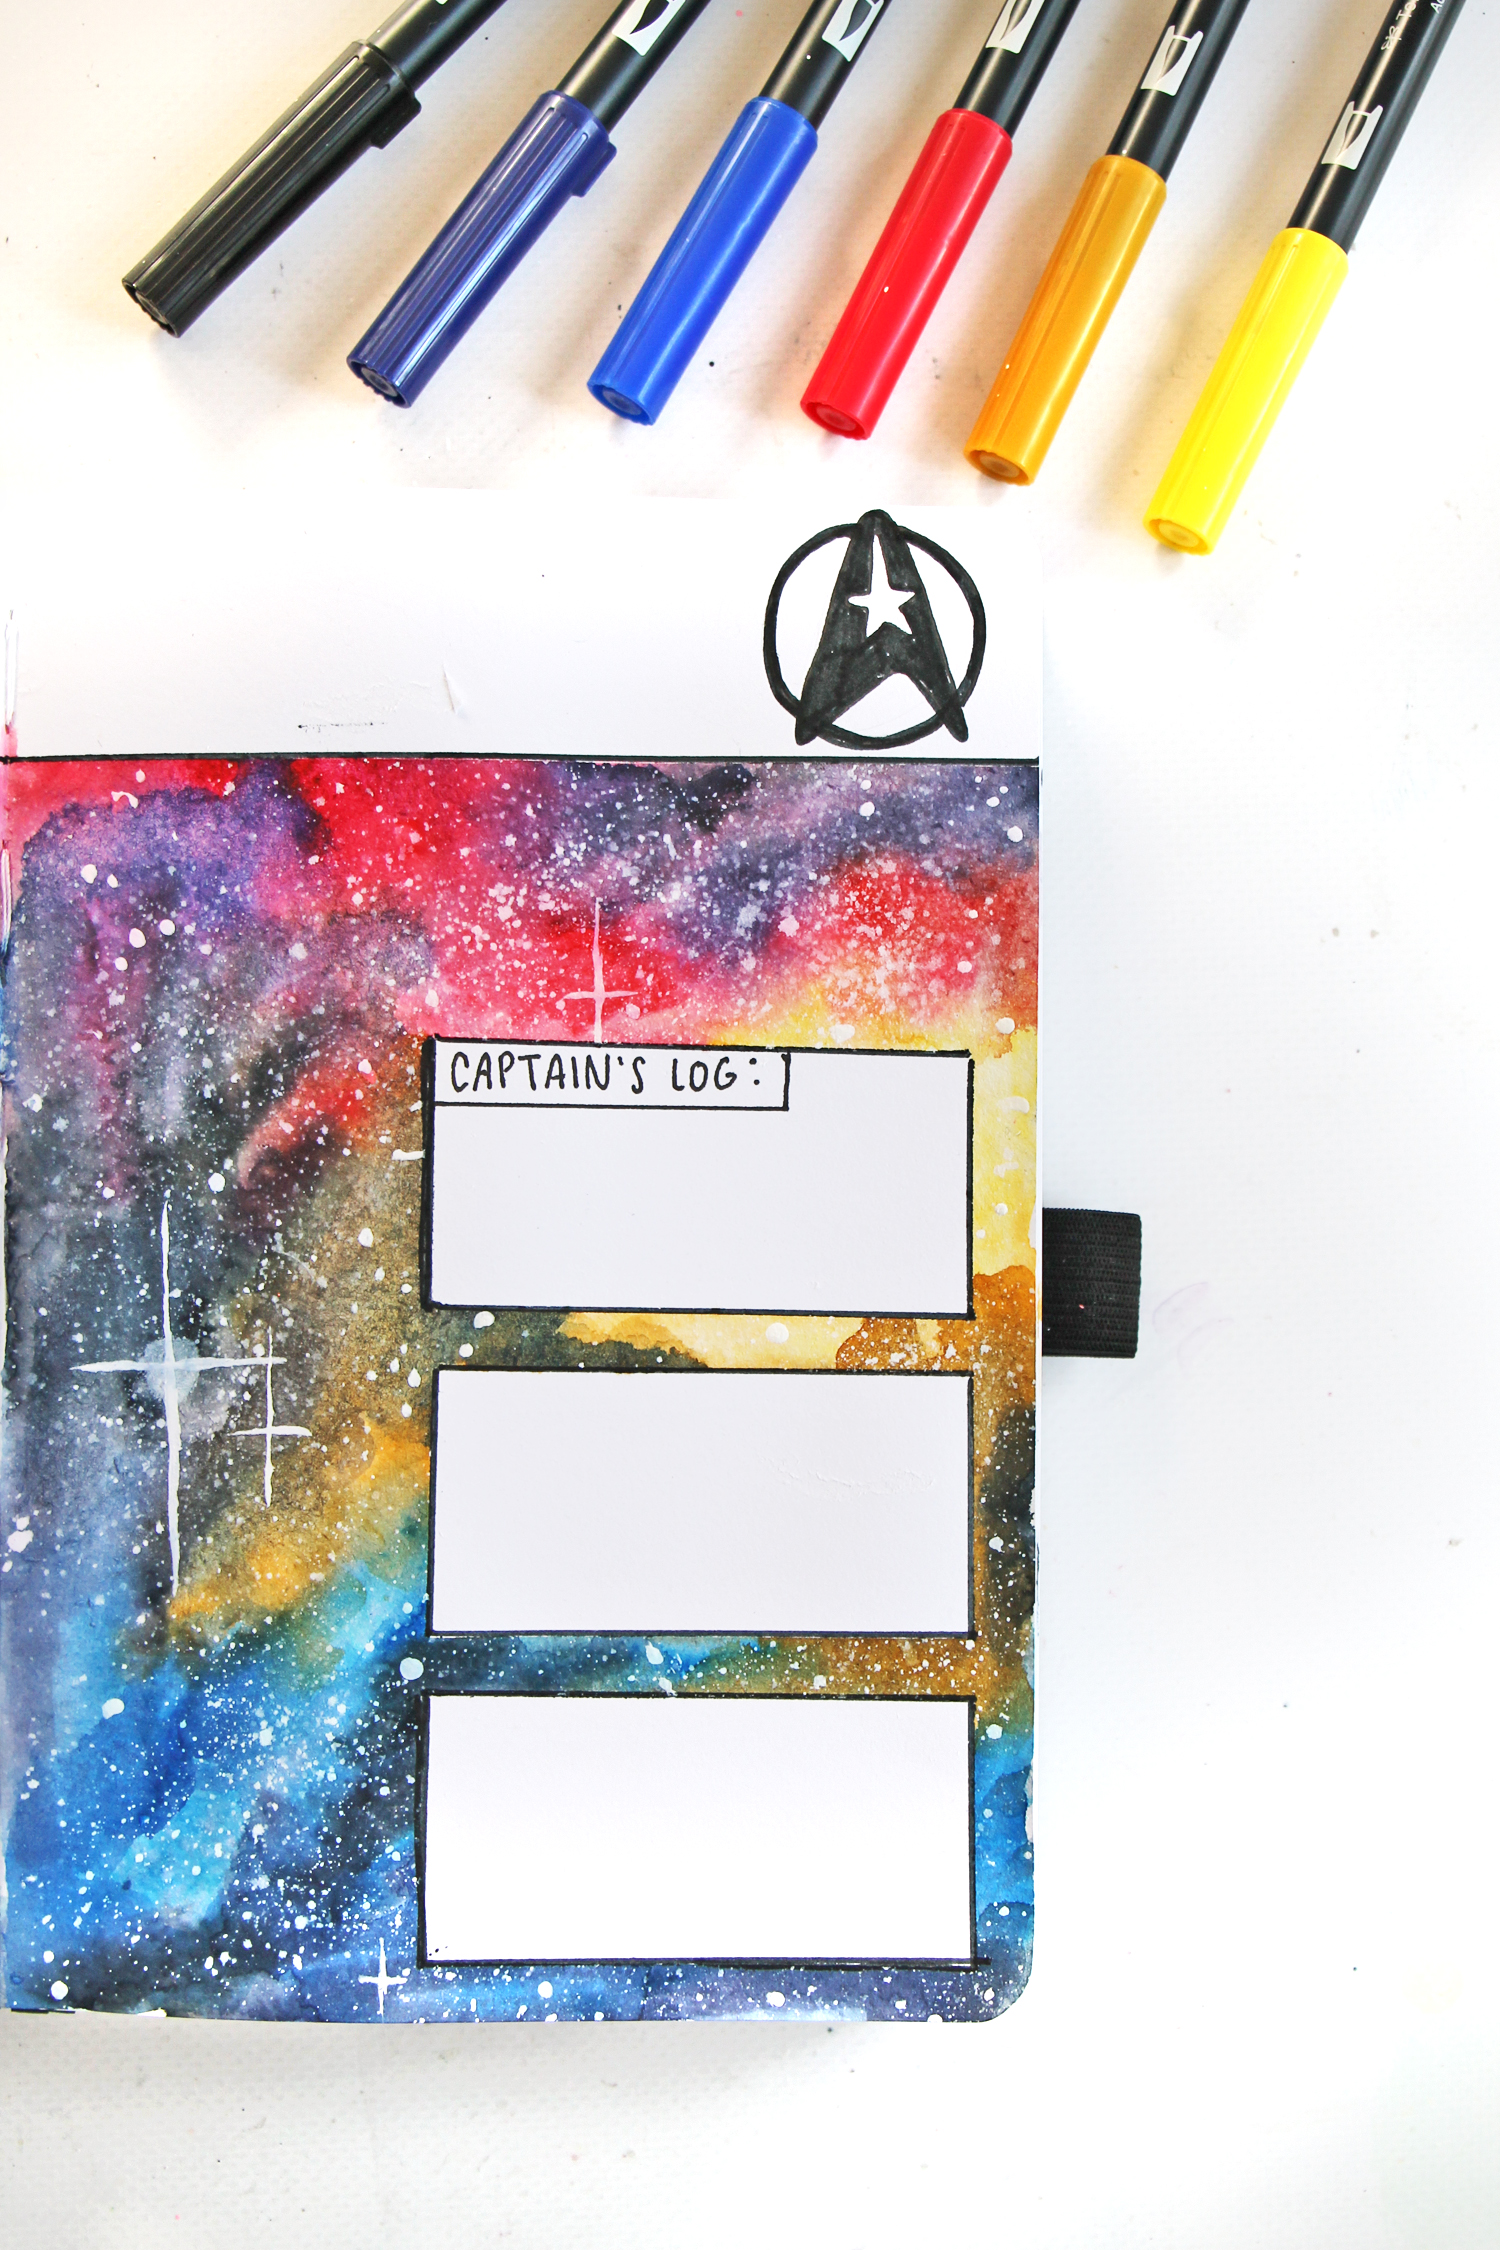 Learn how to create a Star Trek journal page, using @Tombowusa Dual Brush Pens and this tutorial by @studiokatie #tombow #tombowusa #taskjournal